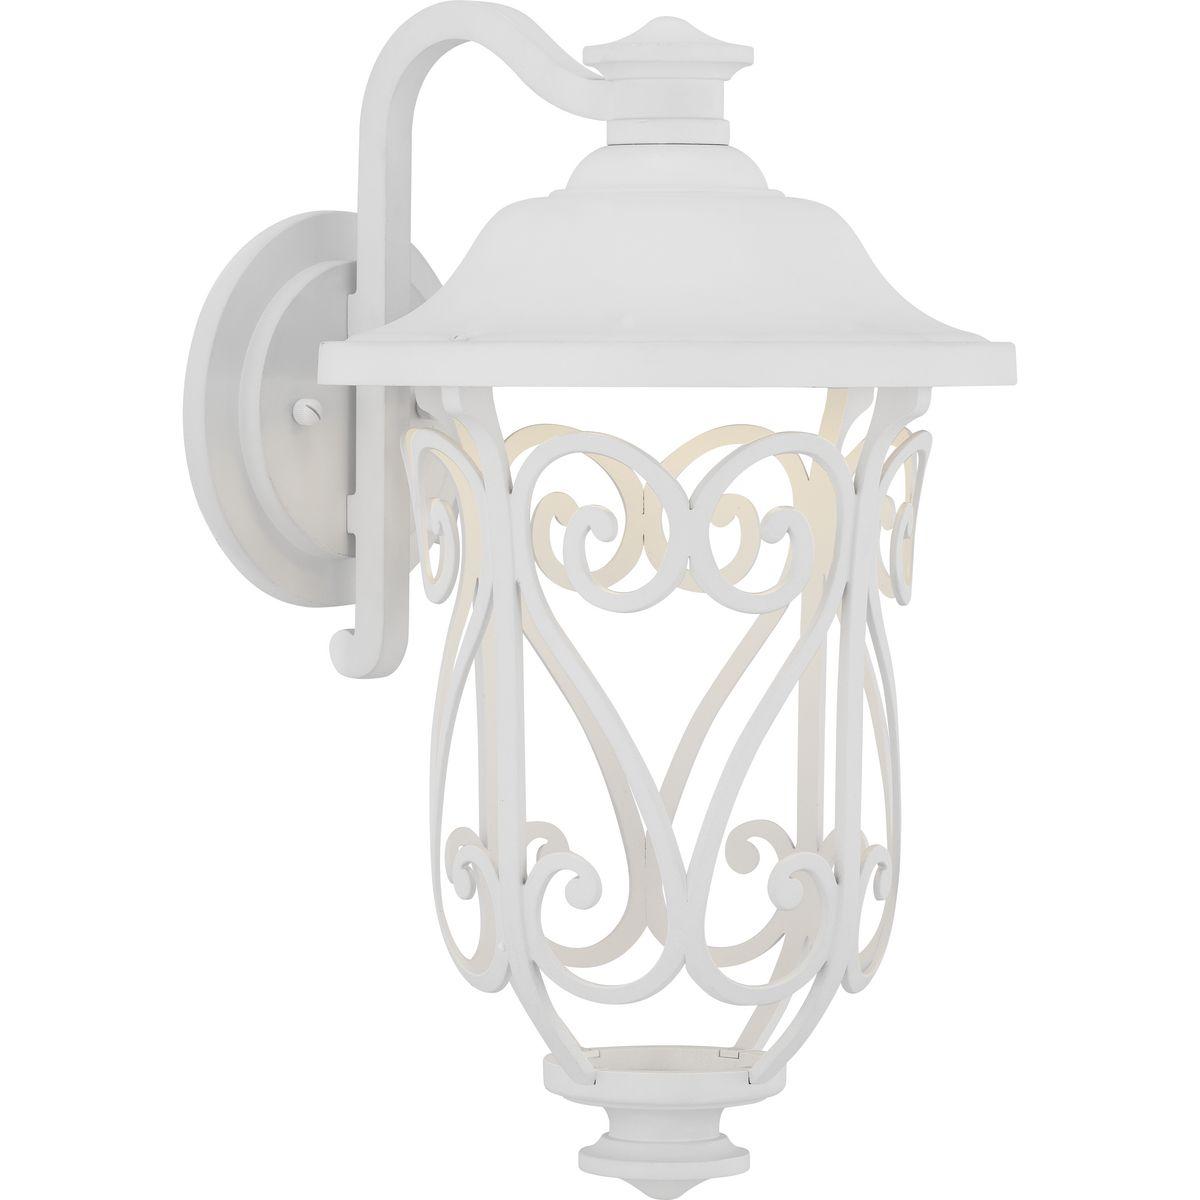 Hubbell P560105-030-30 The Leawood LED Collection medium wall lantern provides delicate scrollwork with dramatic shadow patterns in a modern form. Intricate die cast aluminum construction in classic White finish. A taller design accommodates the larger scale commonly seen in to